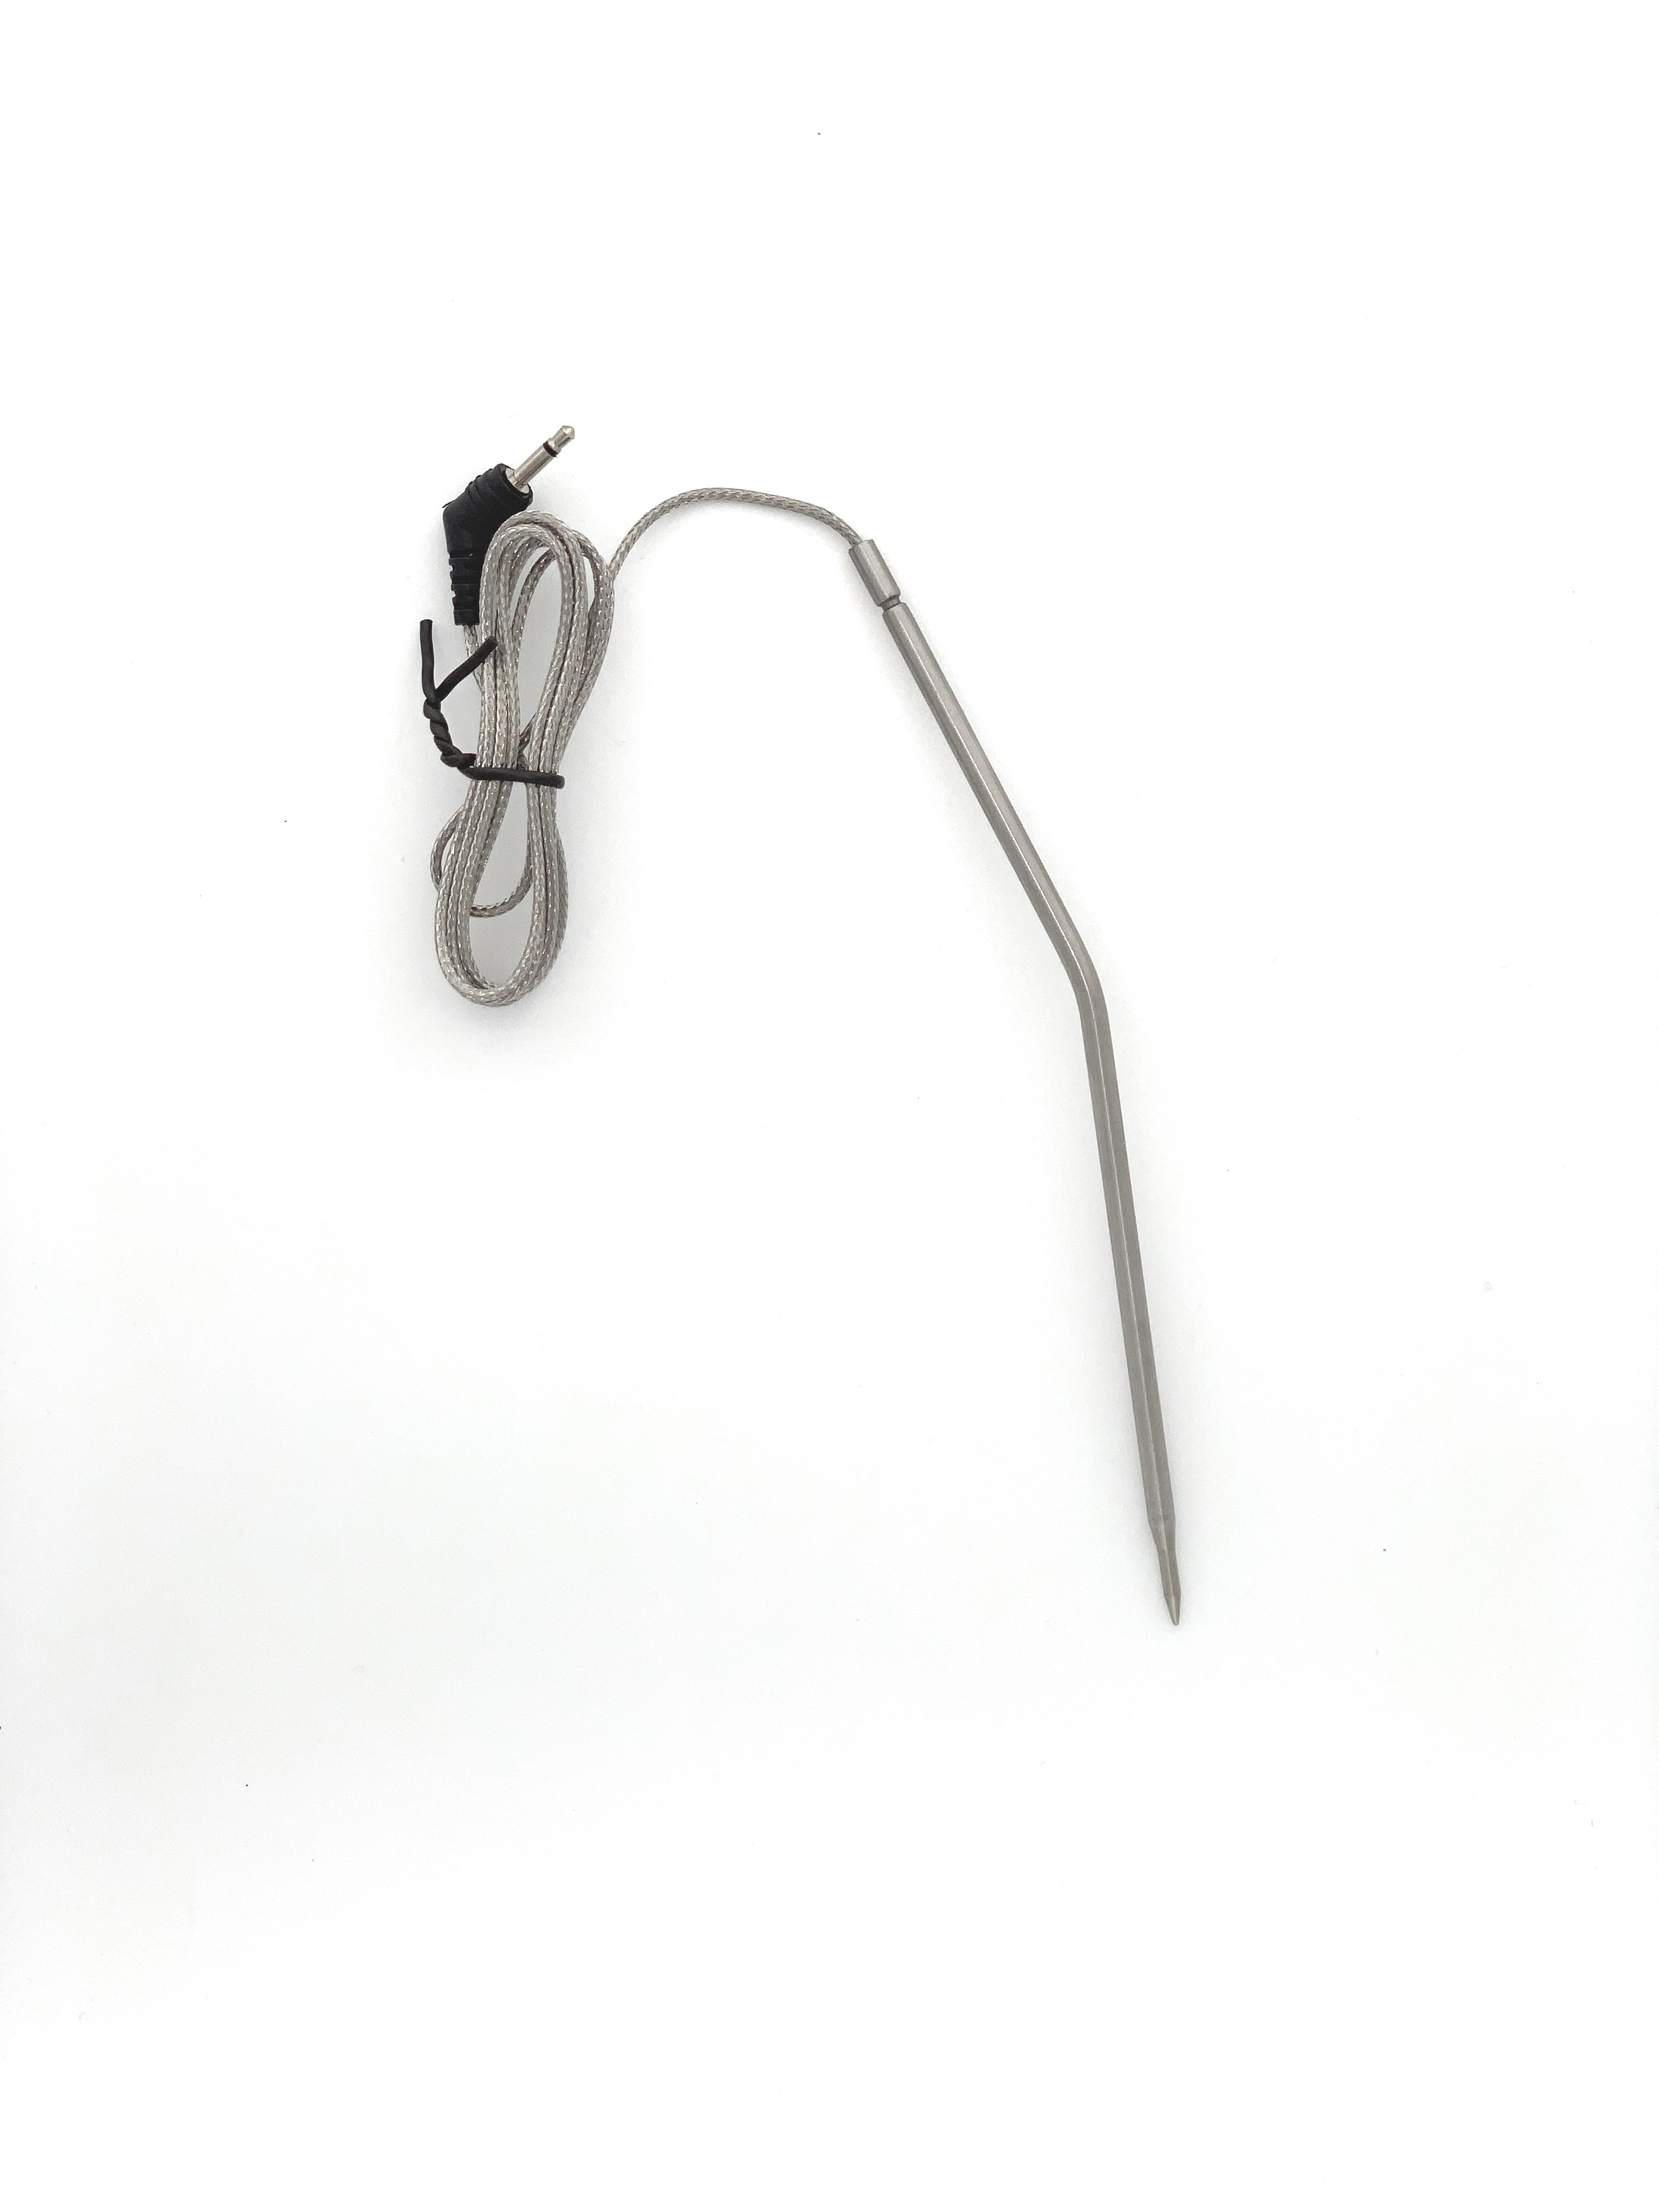 Replacement Meat Probe For Maverick Pellet Grill - Pitts & Spitts